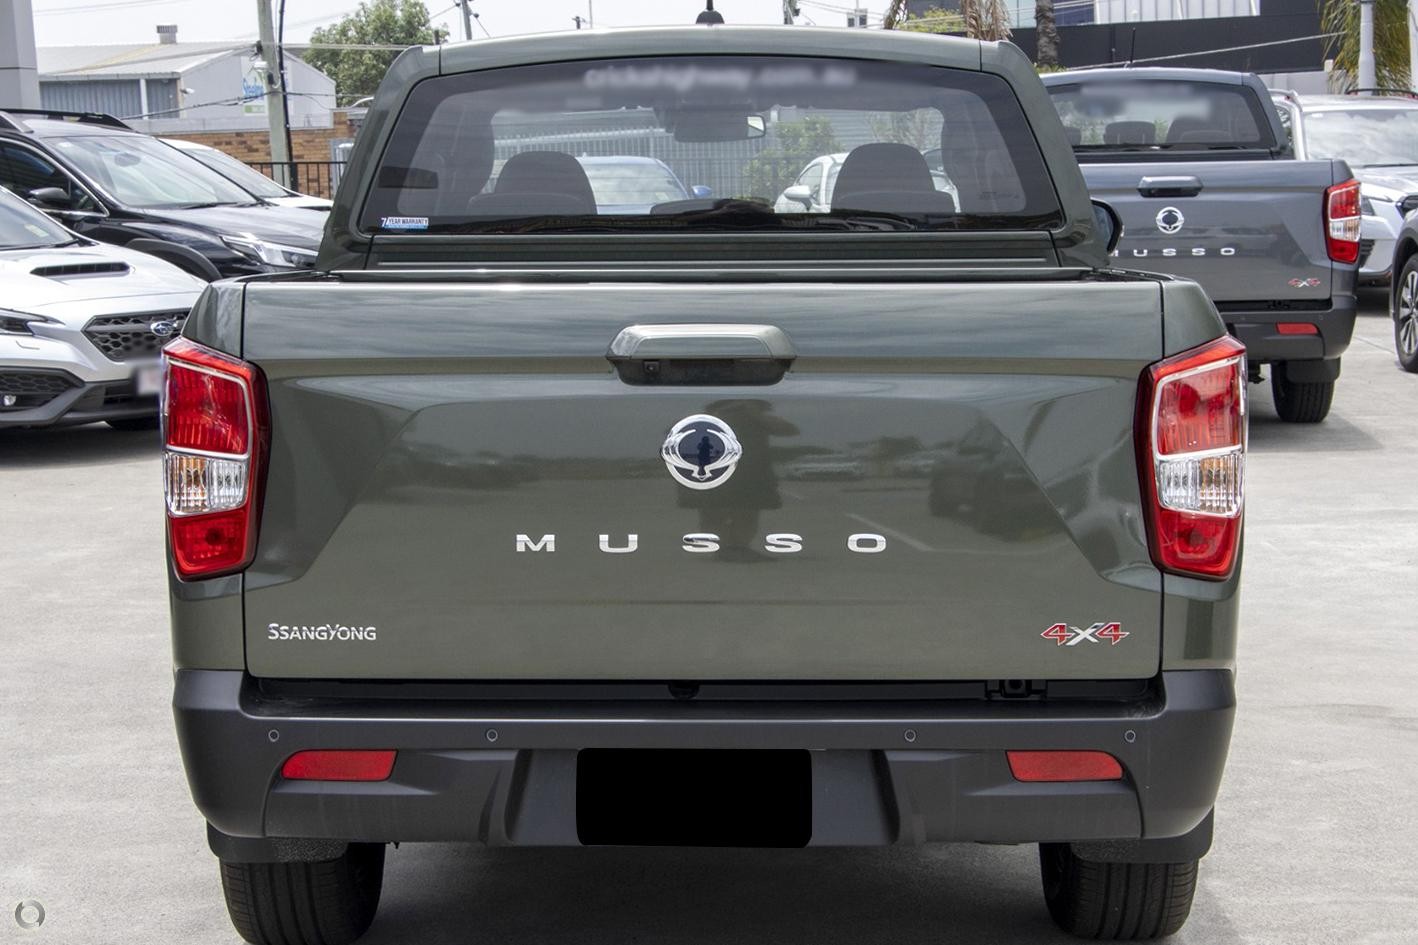 Ssangyong Musso image 3